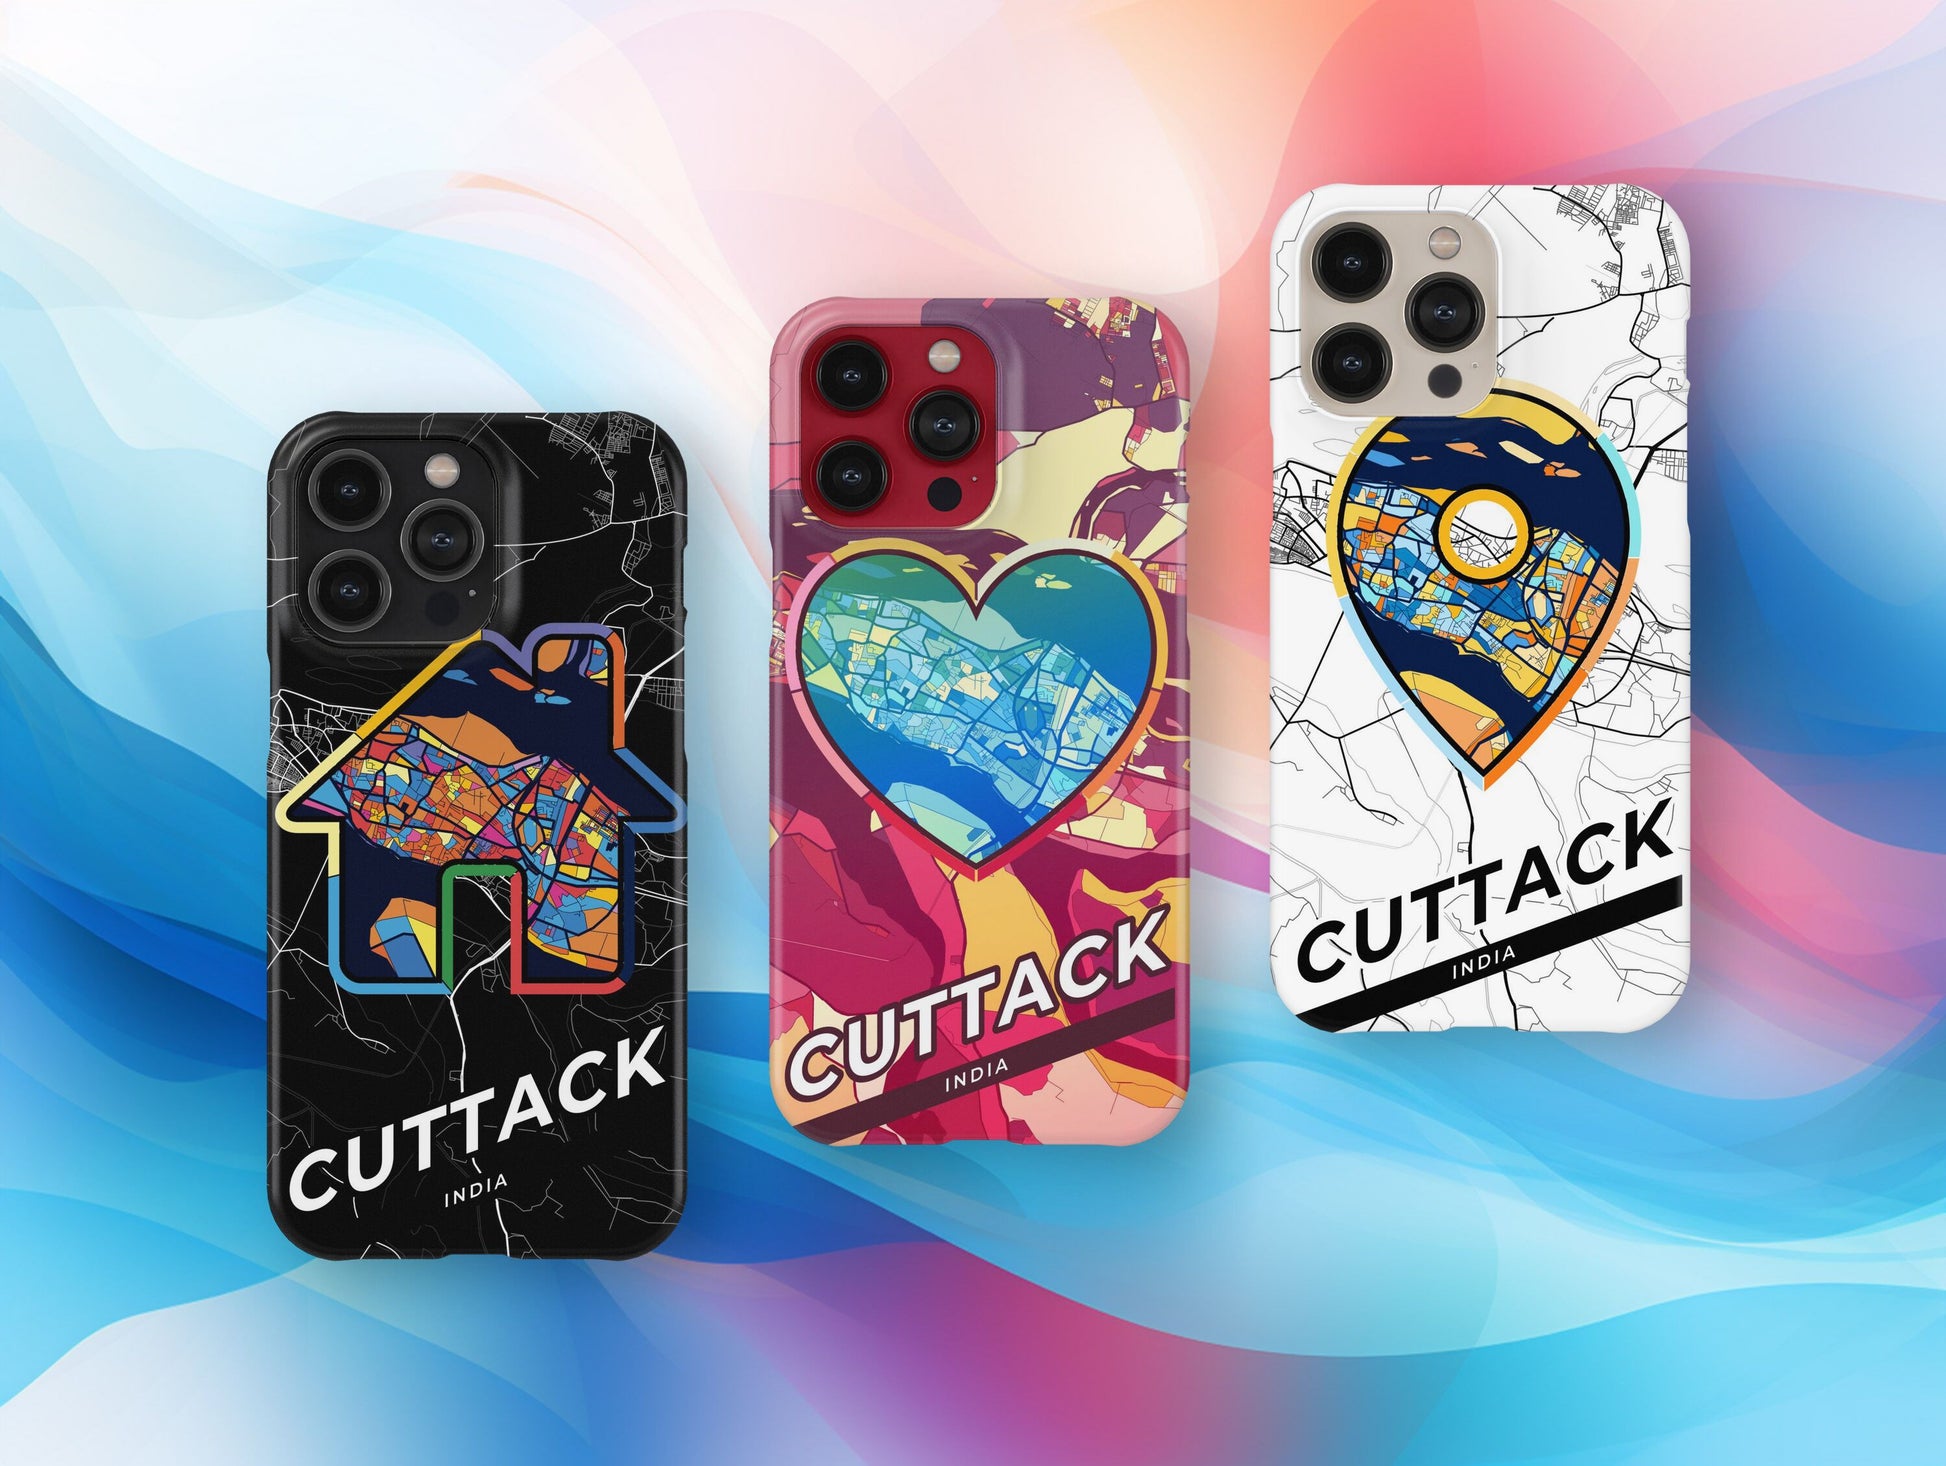 Cuttack India slim phone case with colorful icon. Birthday, wedding or housewarming gift. Couple match cases.